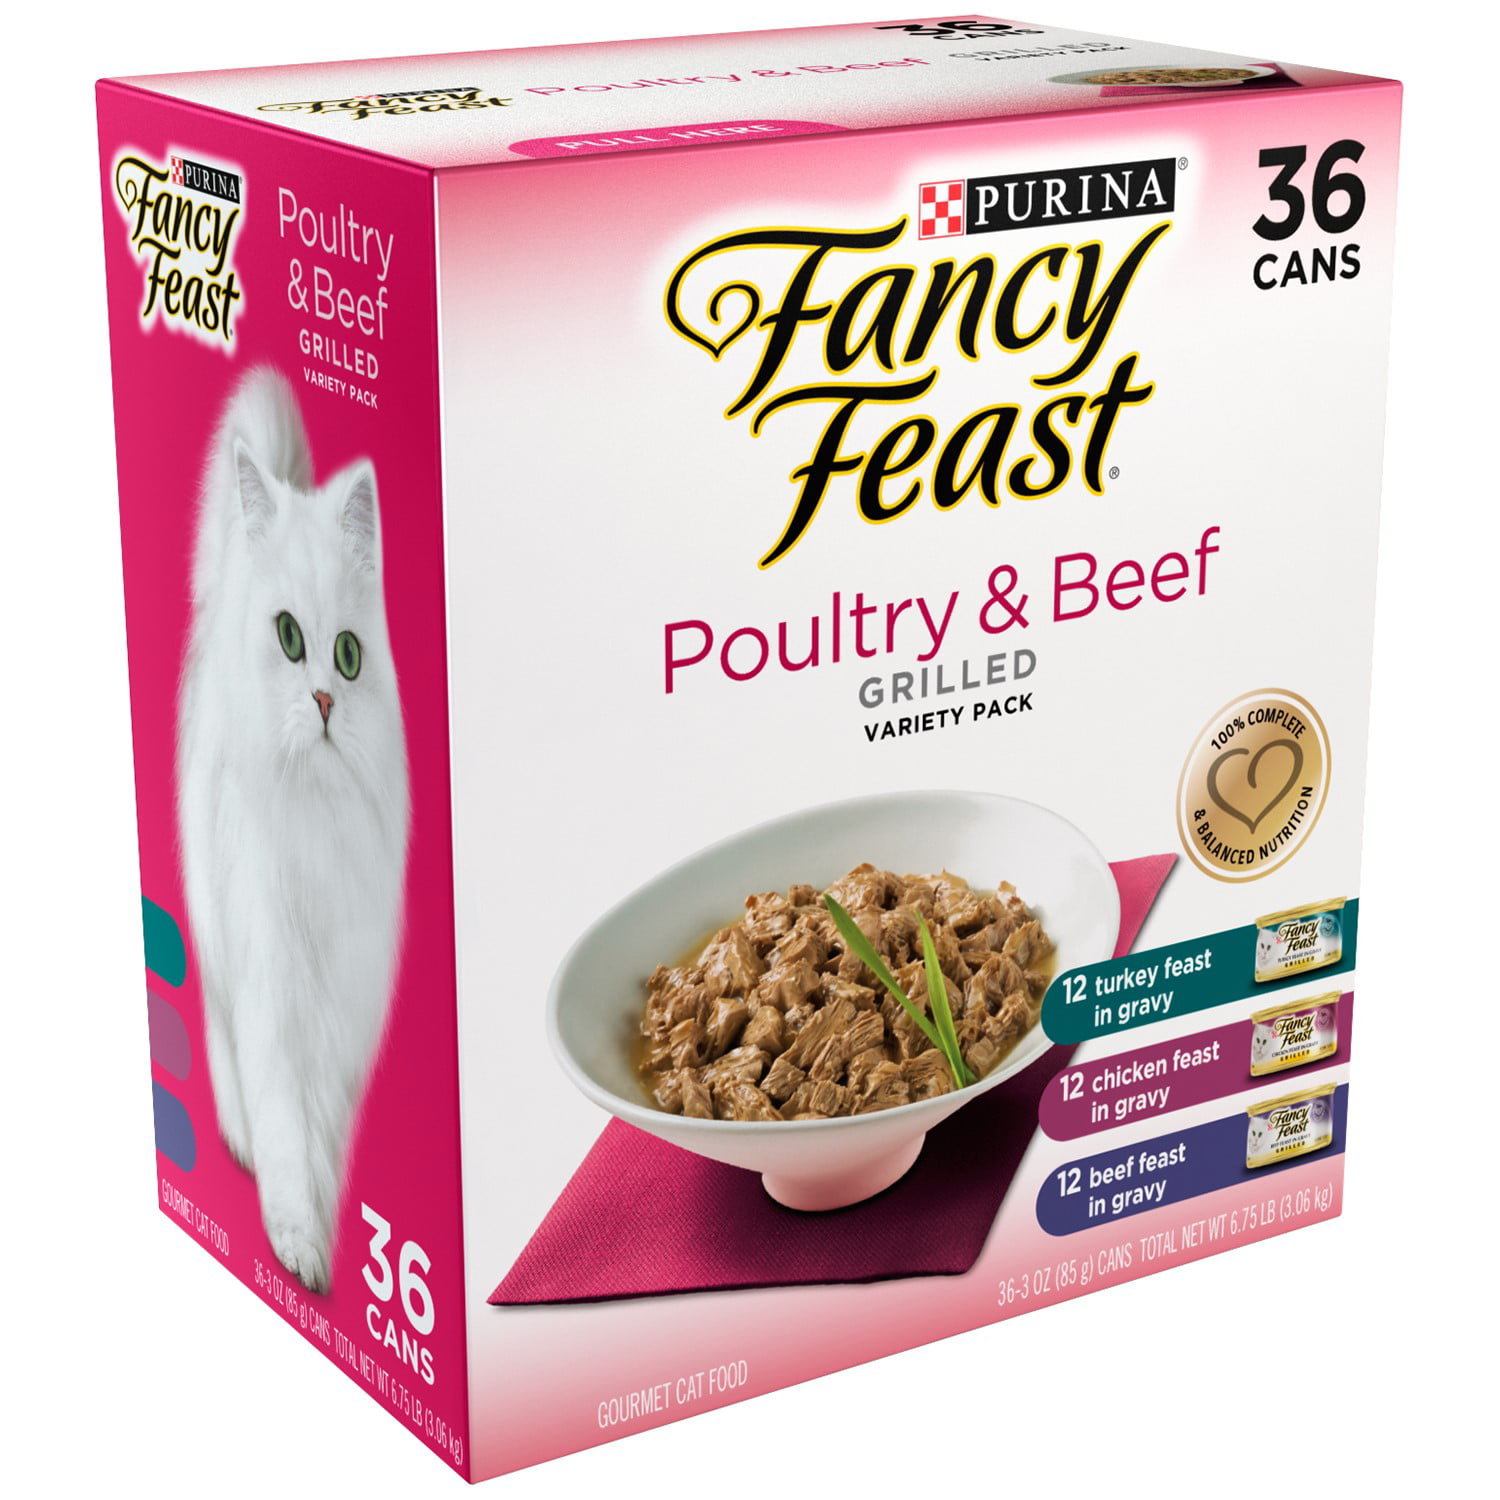 Purina Fancy Feast Grilled Poultry & Beef Variety Pack Wet Cat Food, 3